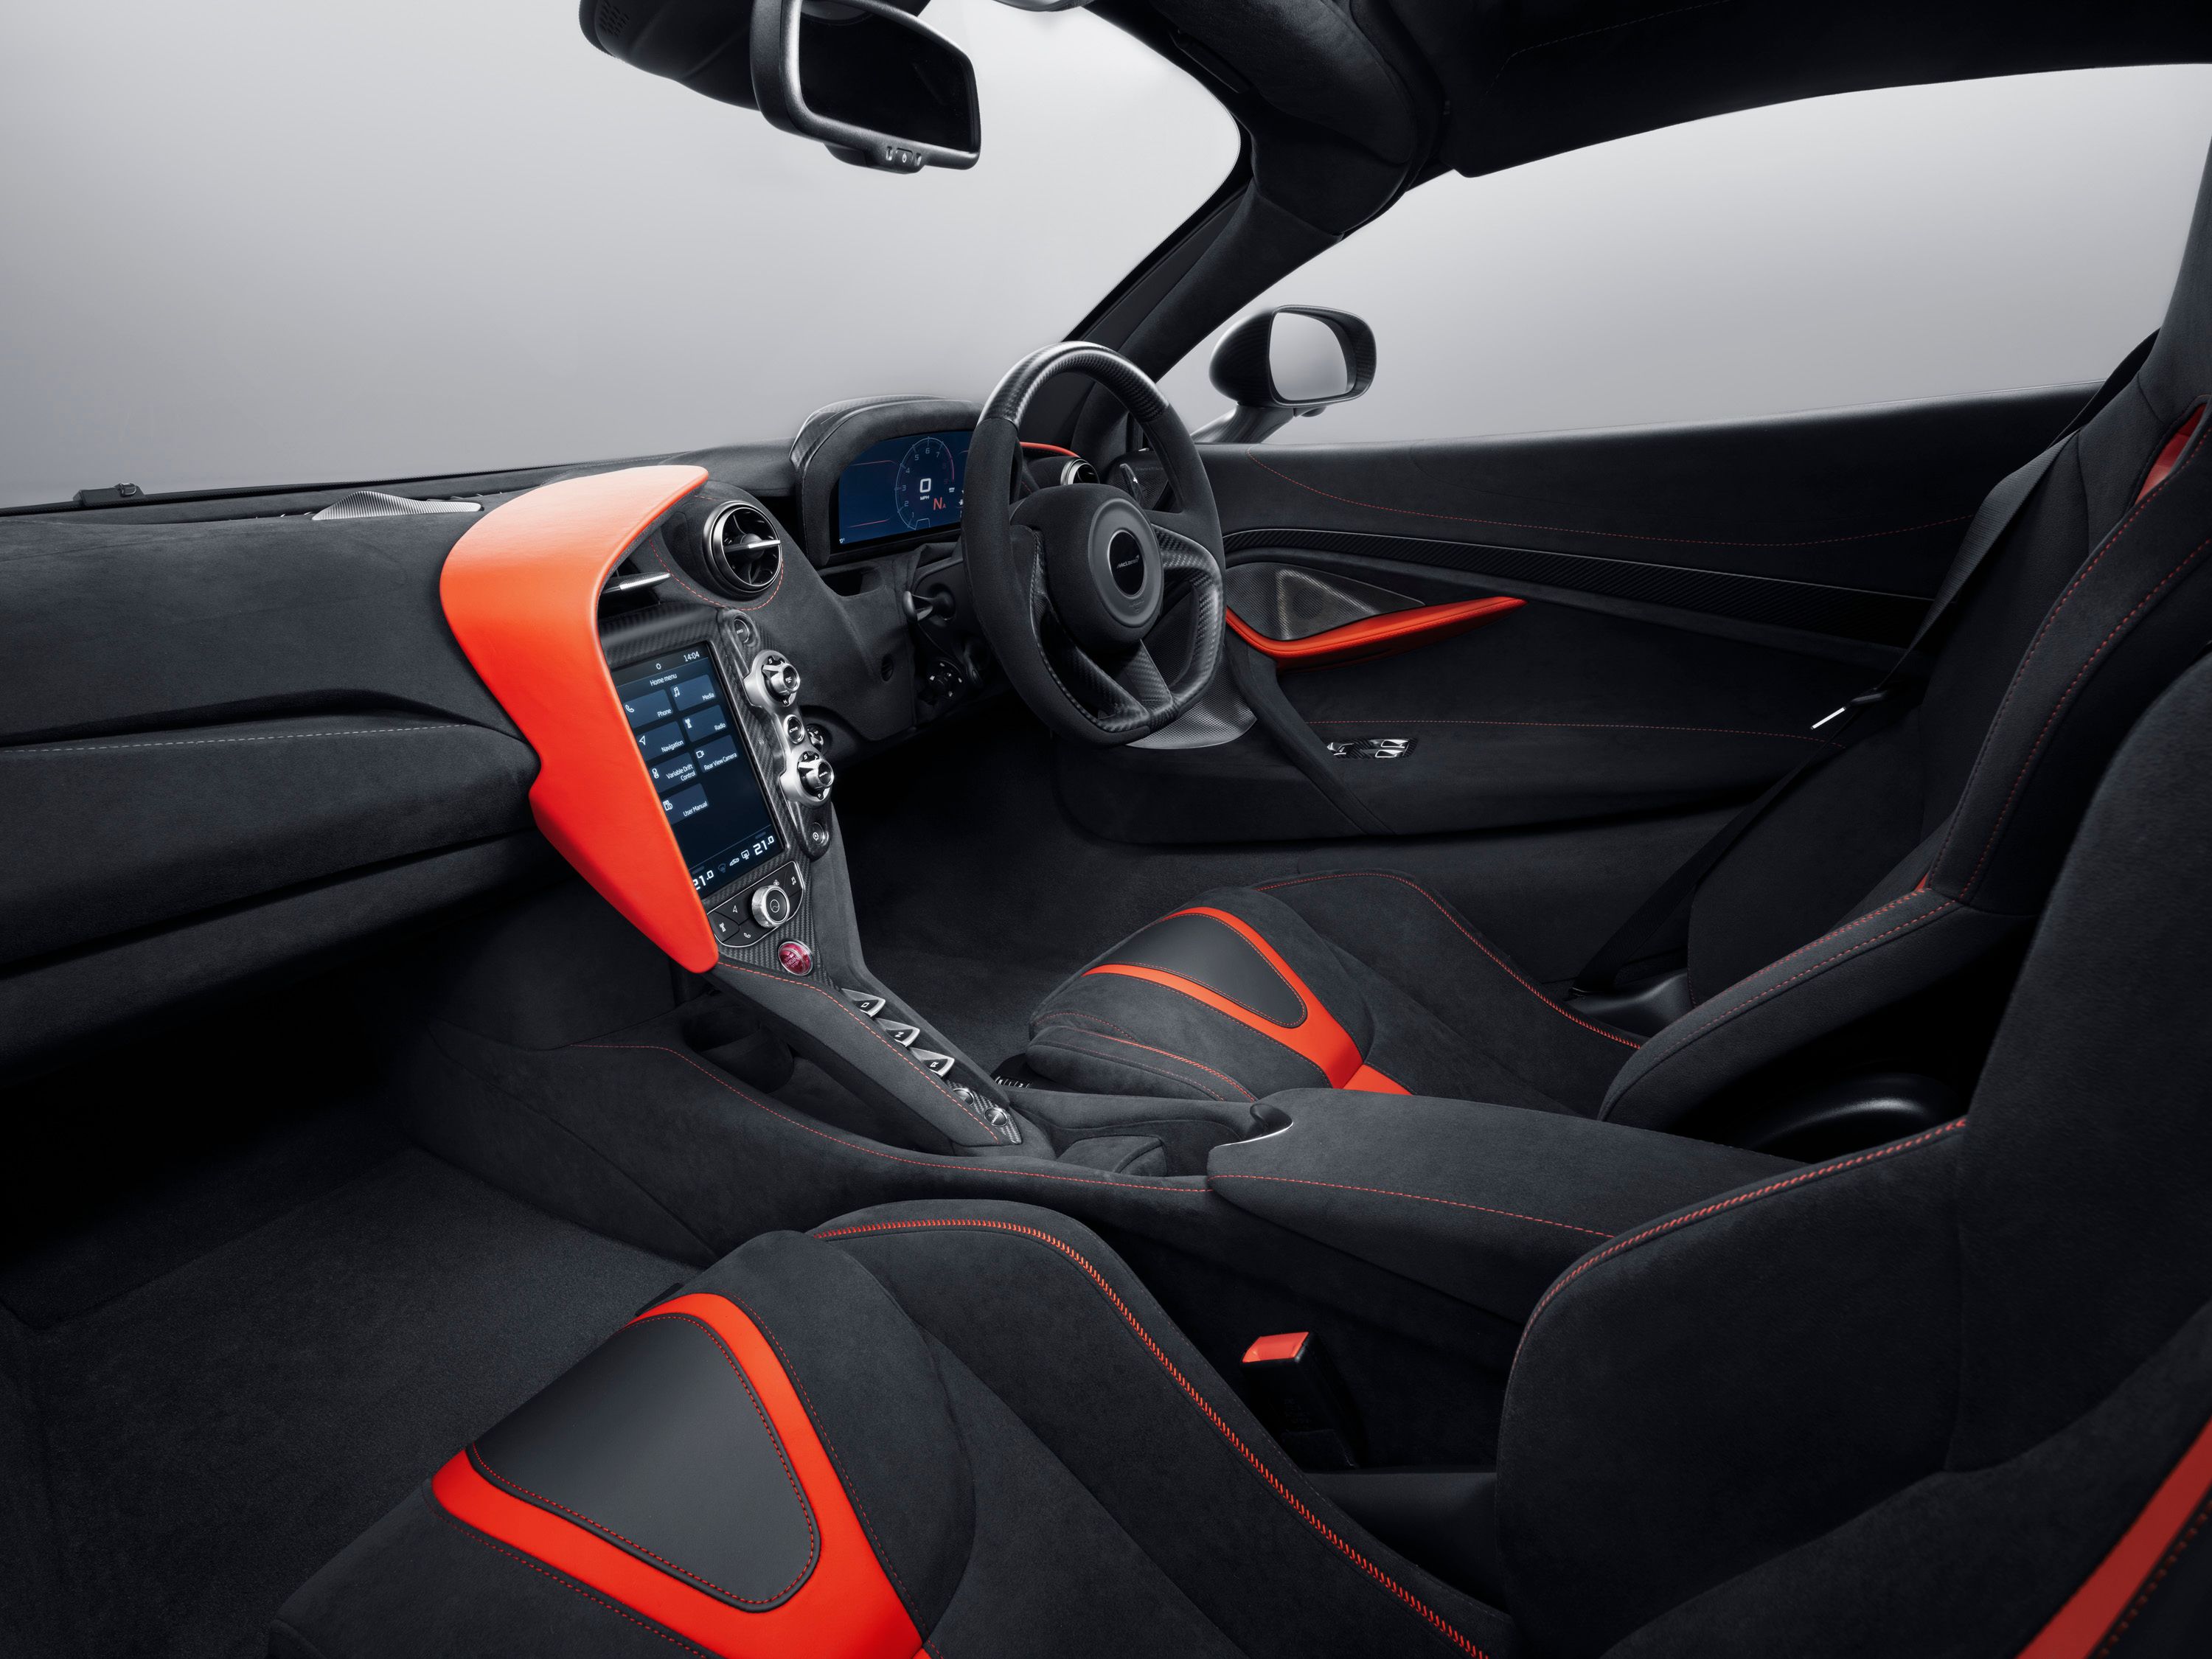 2019 McLaren Special Operations 720S Stealth Theme